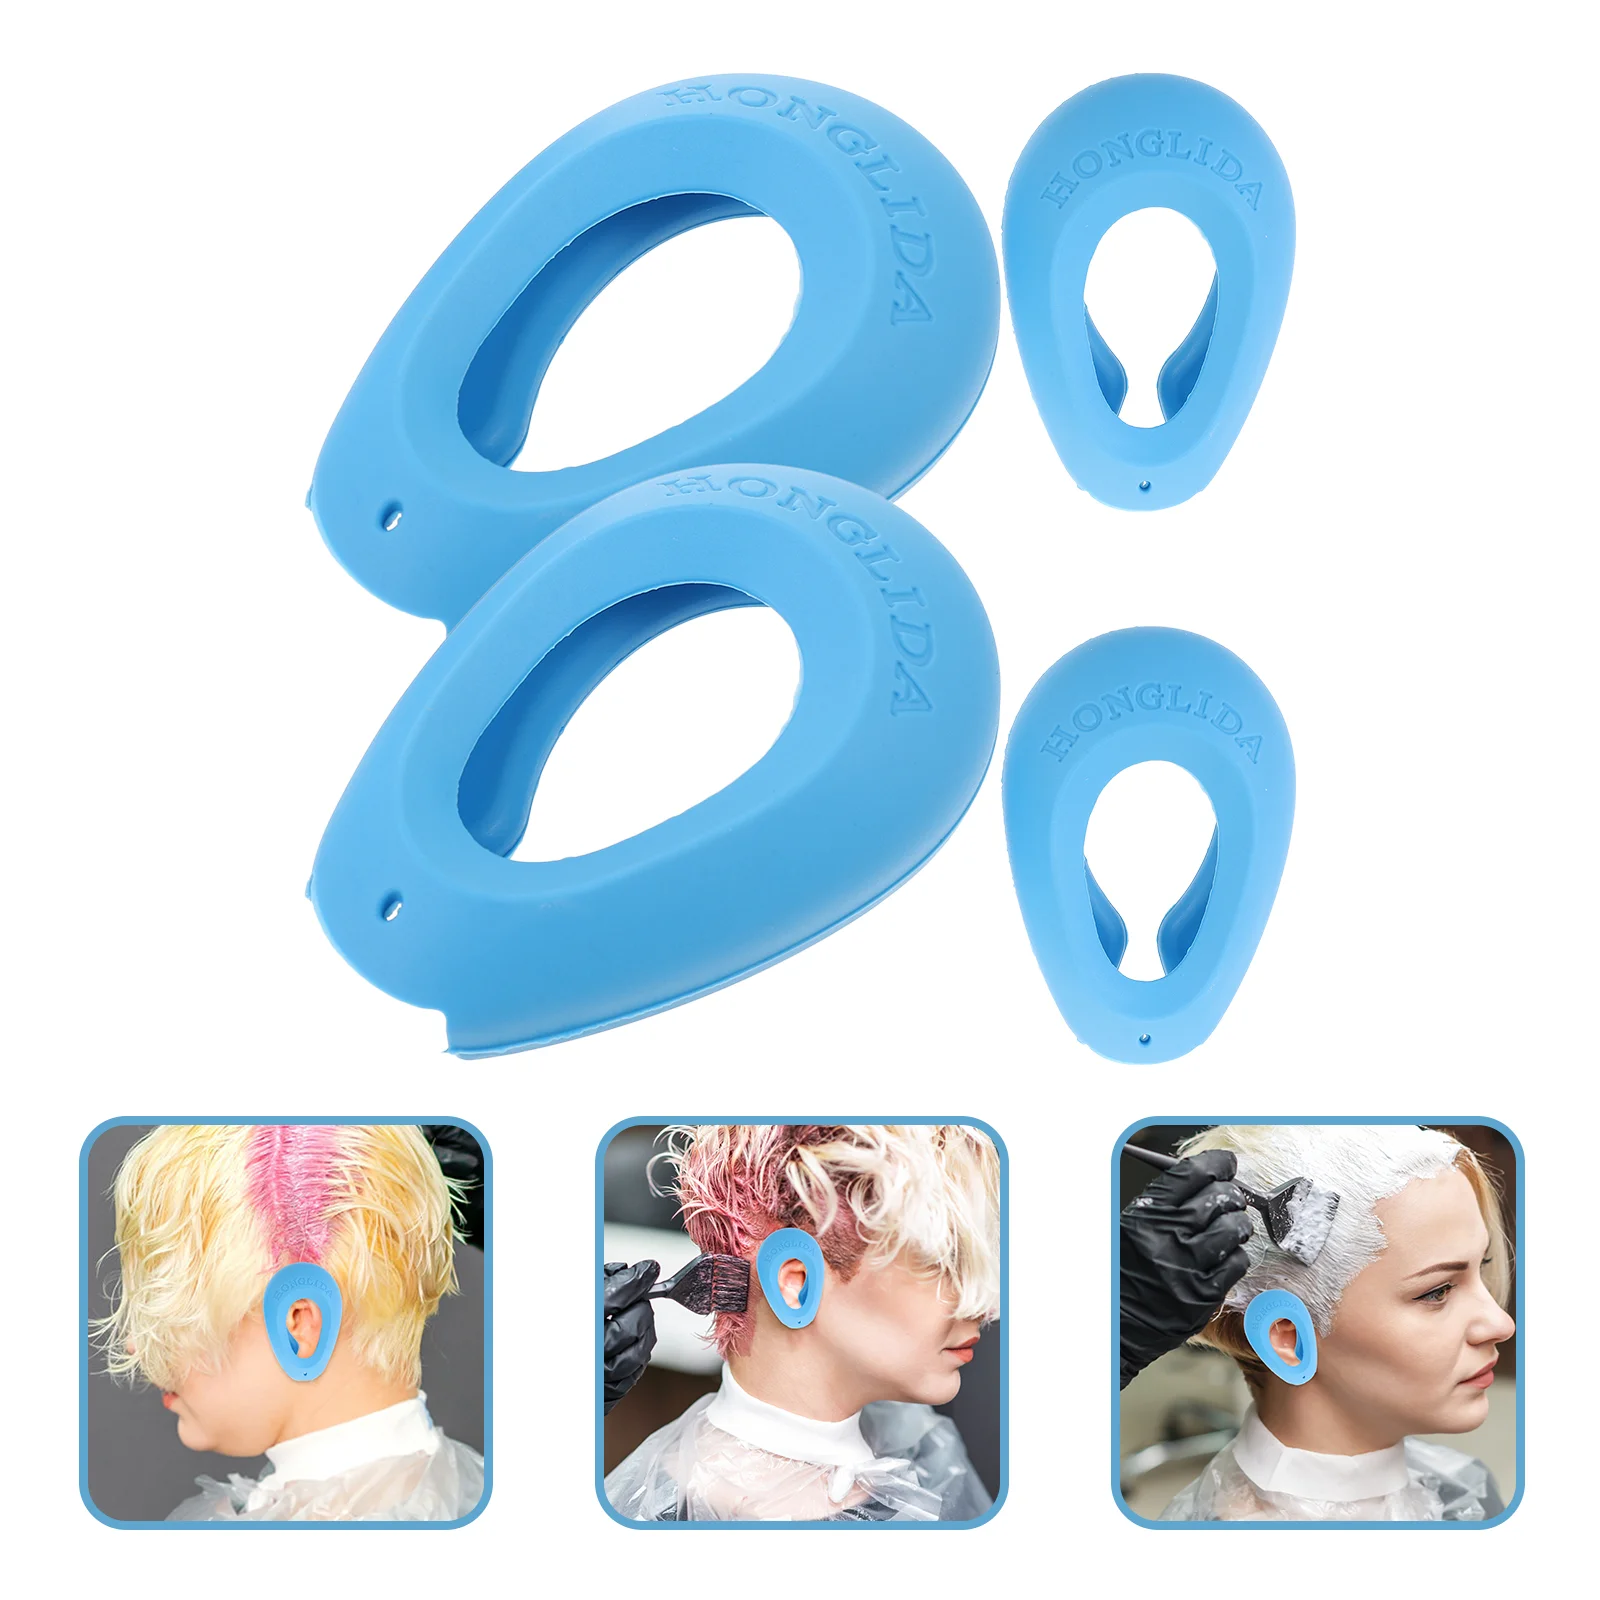 

Silicone Ear Cover Hair Coloring Dyeing Ear Protector Waterproof Shower Ear Shield Earmuffs Caps Salon Styling Tool